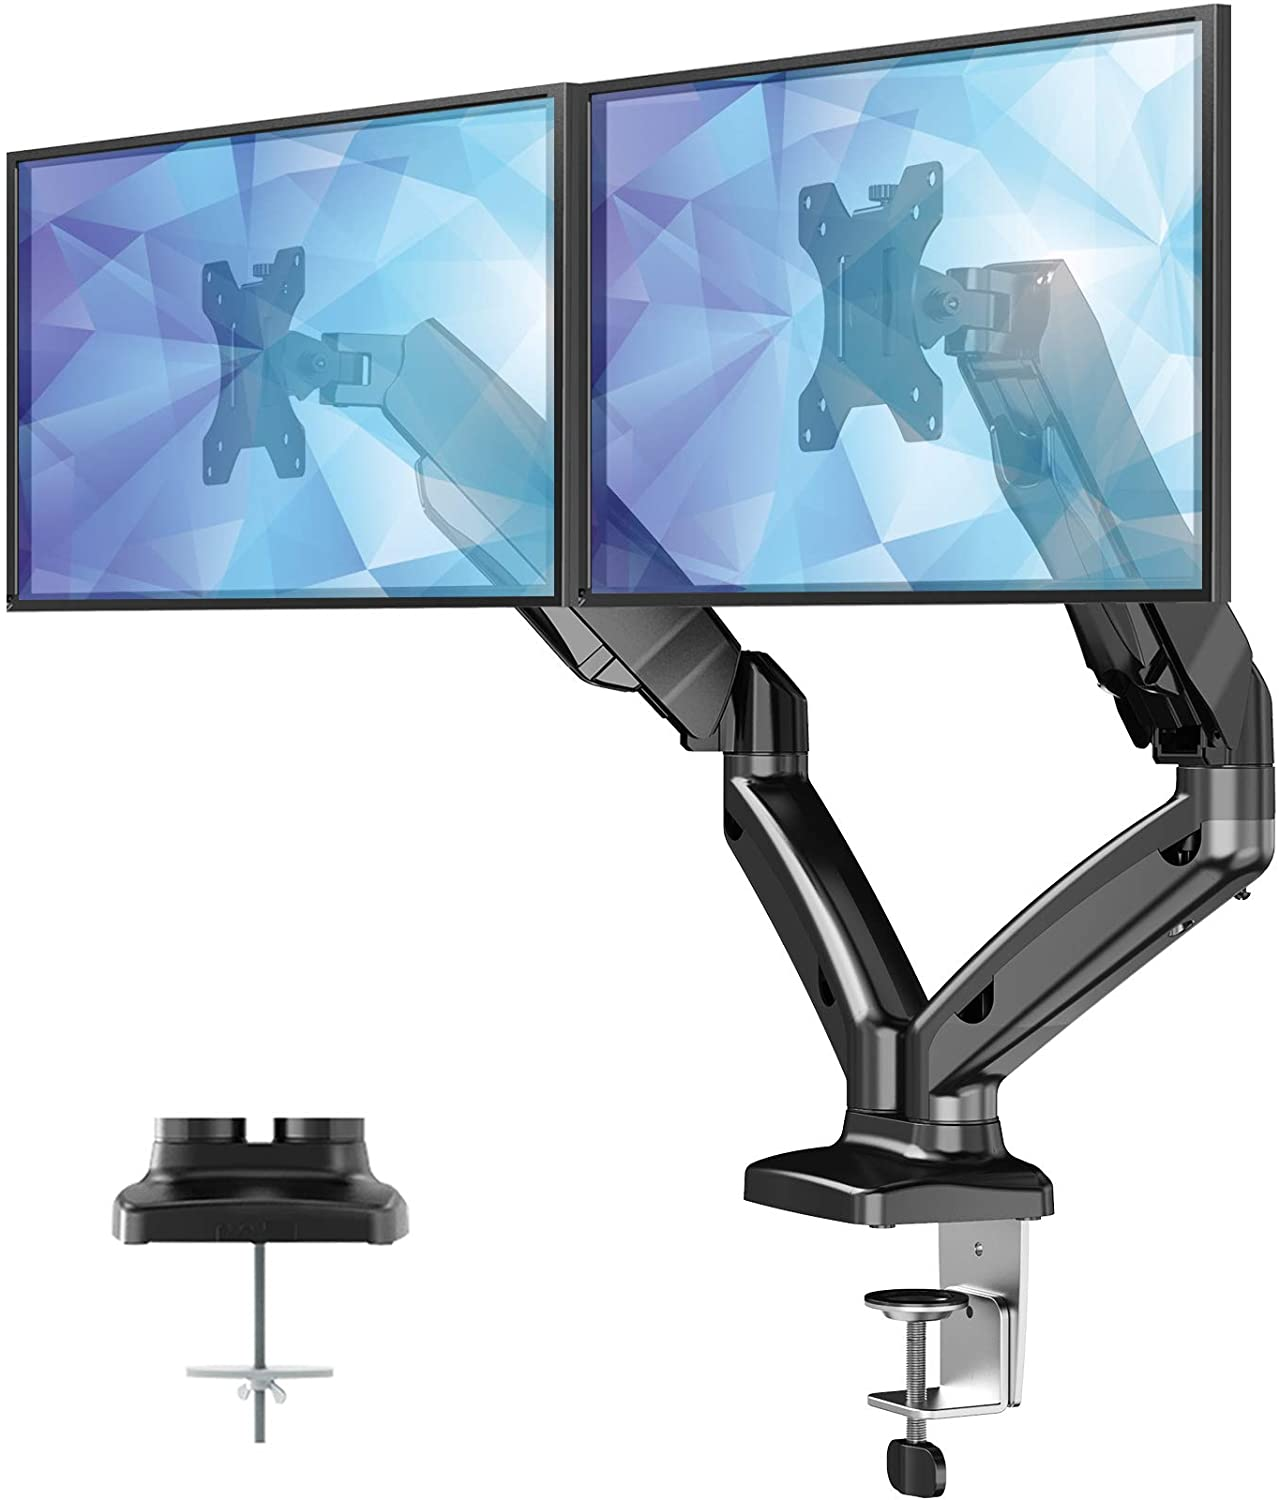 Amazon.com : HUANUO Dual Monitor Stand - Gas Spring, for 13" to 27" Screens - Each Arm Holds Up to 17.6lbs $13.54